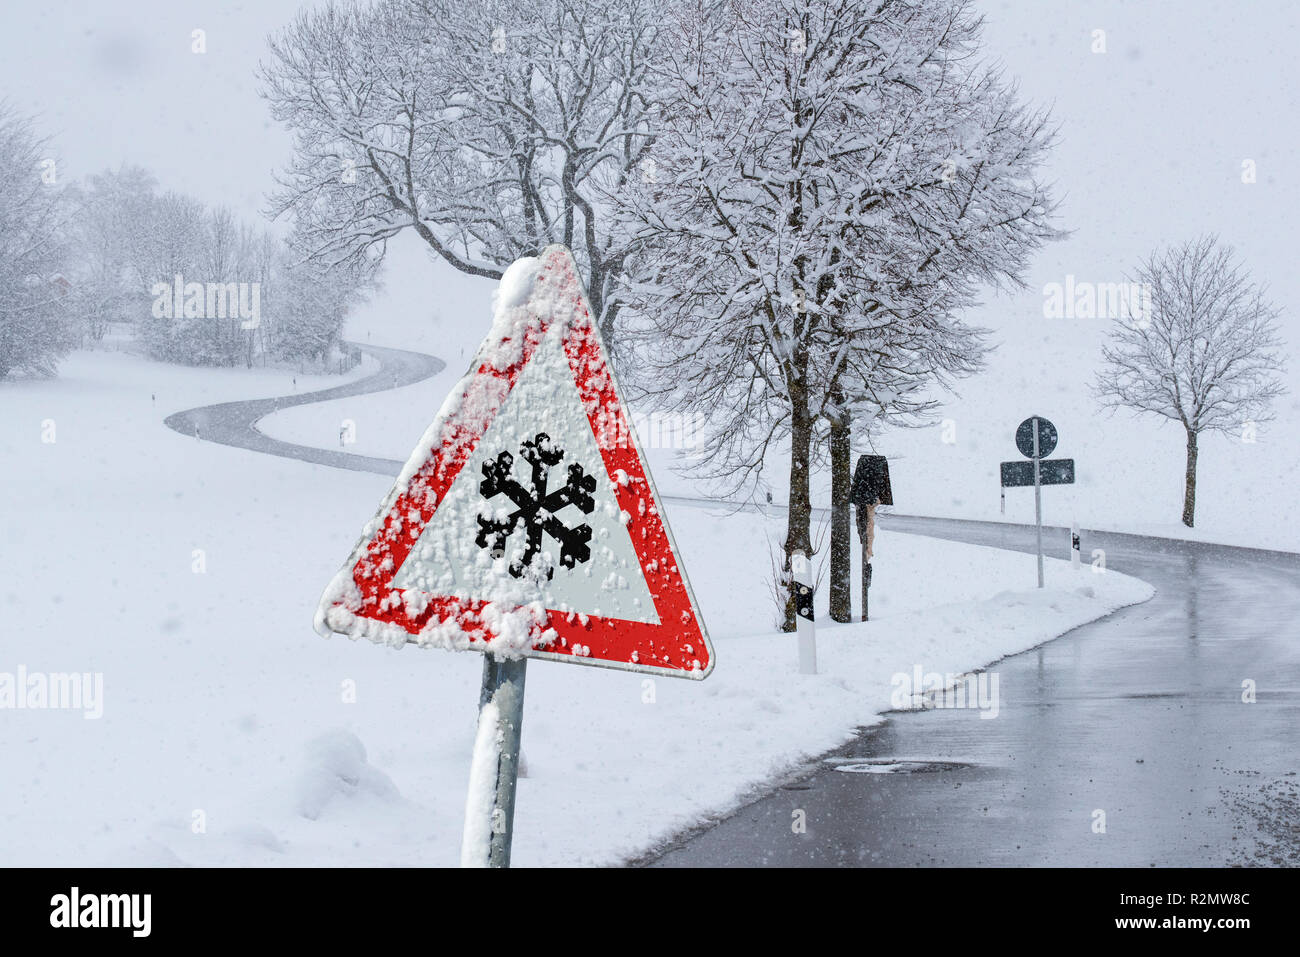 Warning sign of hard-packed snow on road Stock Photo